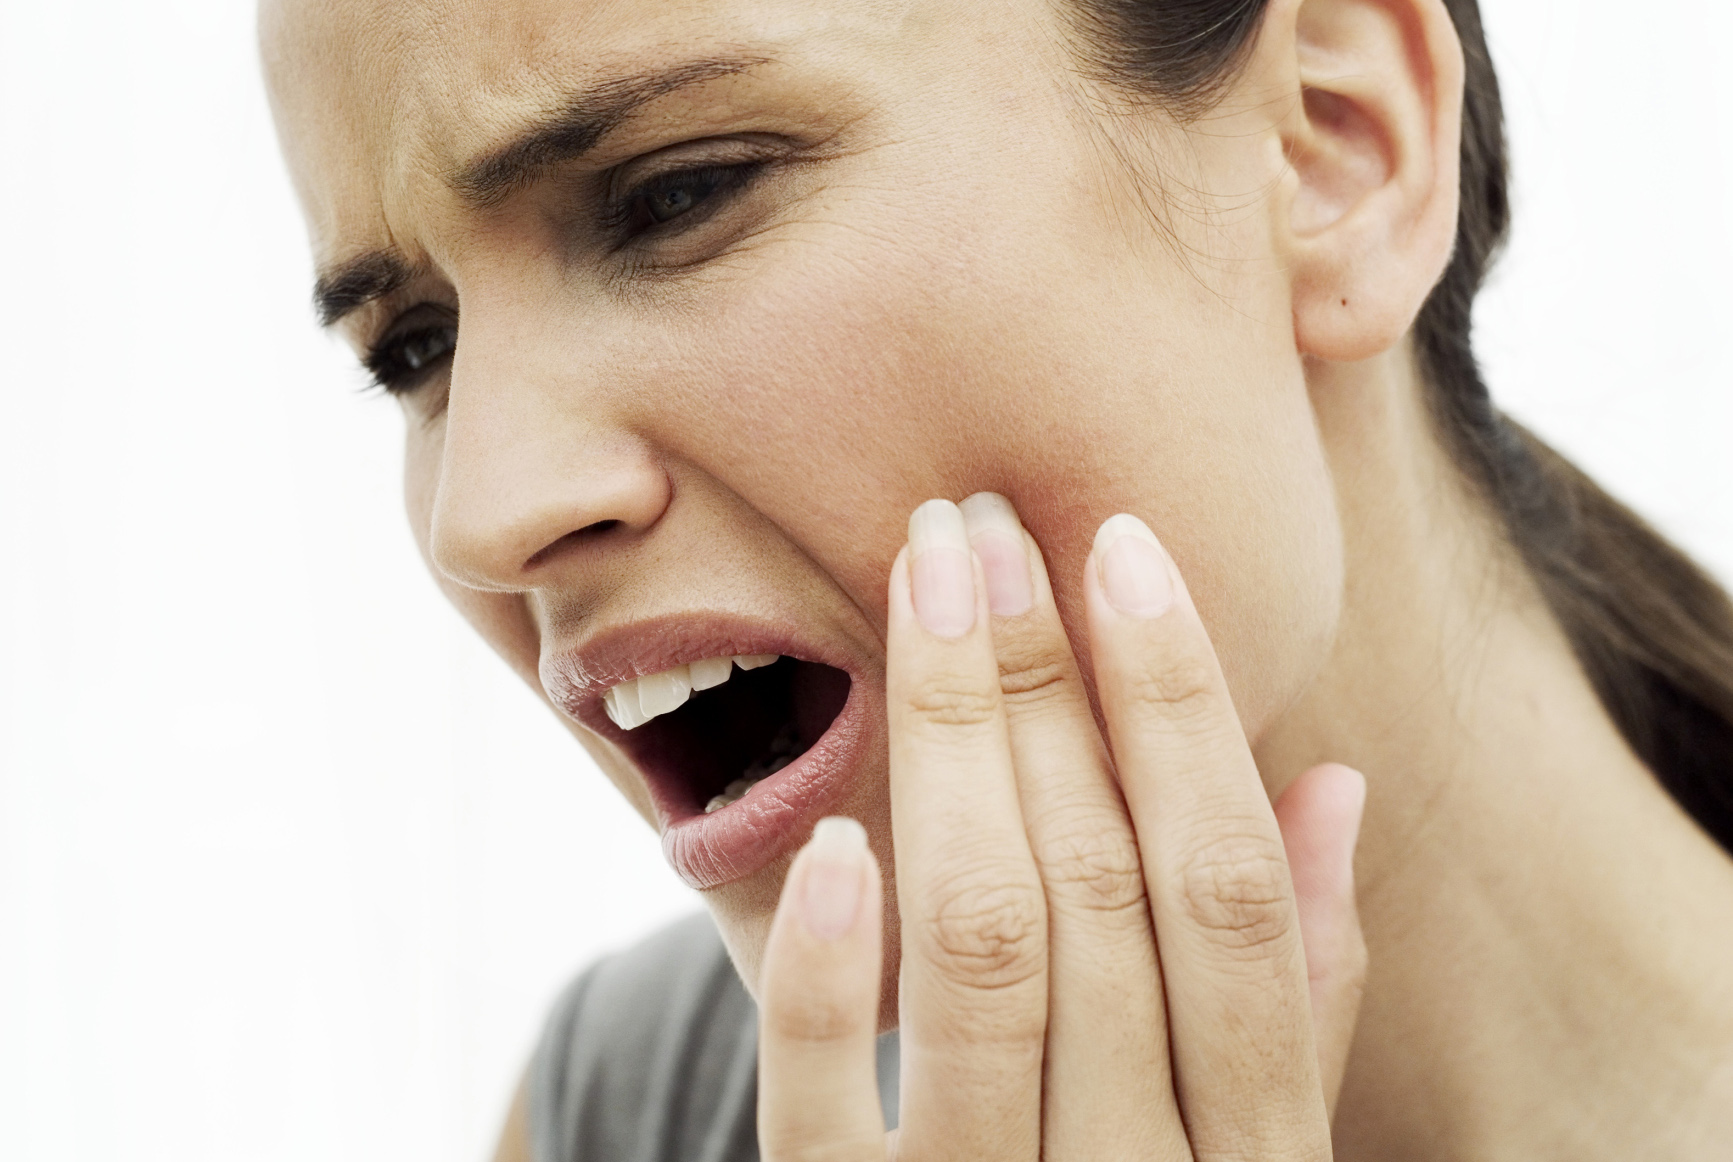 http://www.spearmintdental.com/toothache-causes-prevention-and-treatment/ | spearmintdental